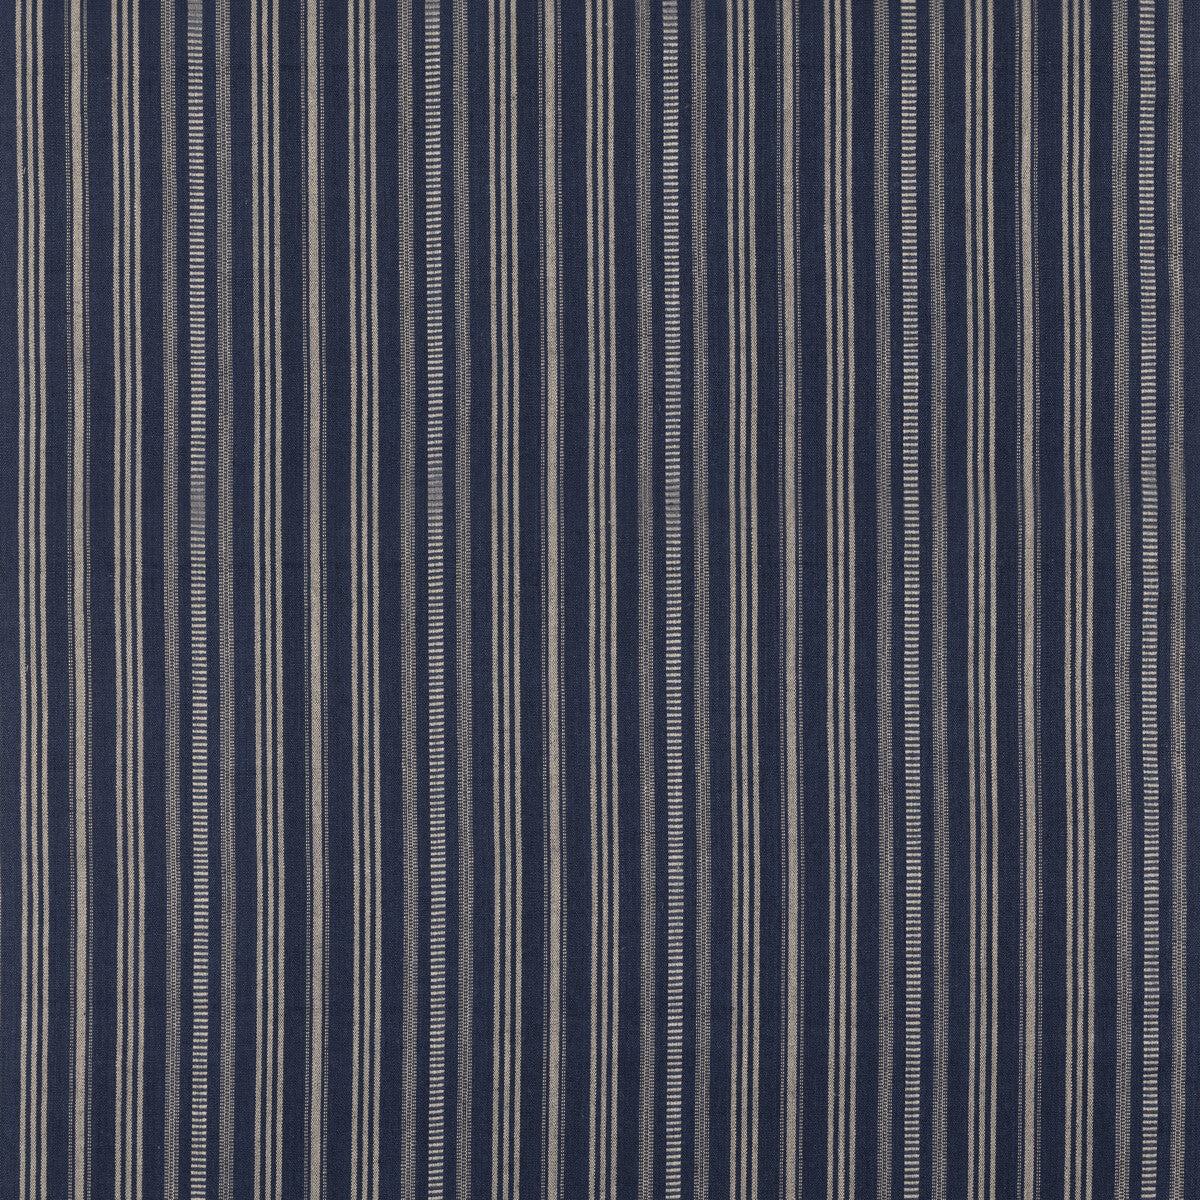 Signal Stripe fabric in indigo color - pattern FD831.H10.0 - by Mulberry in the Westerly Stripes collection